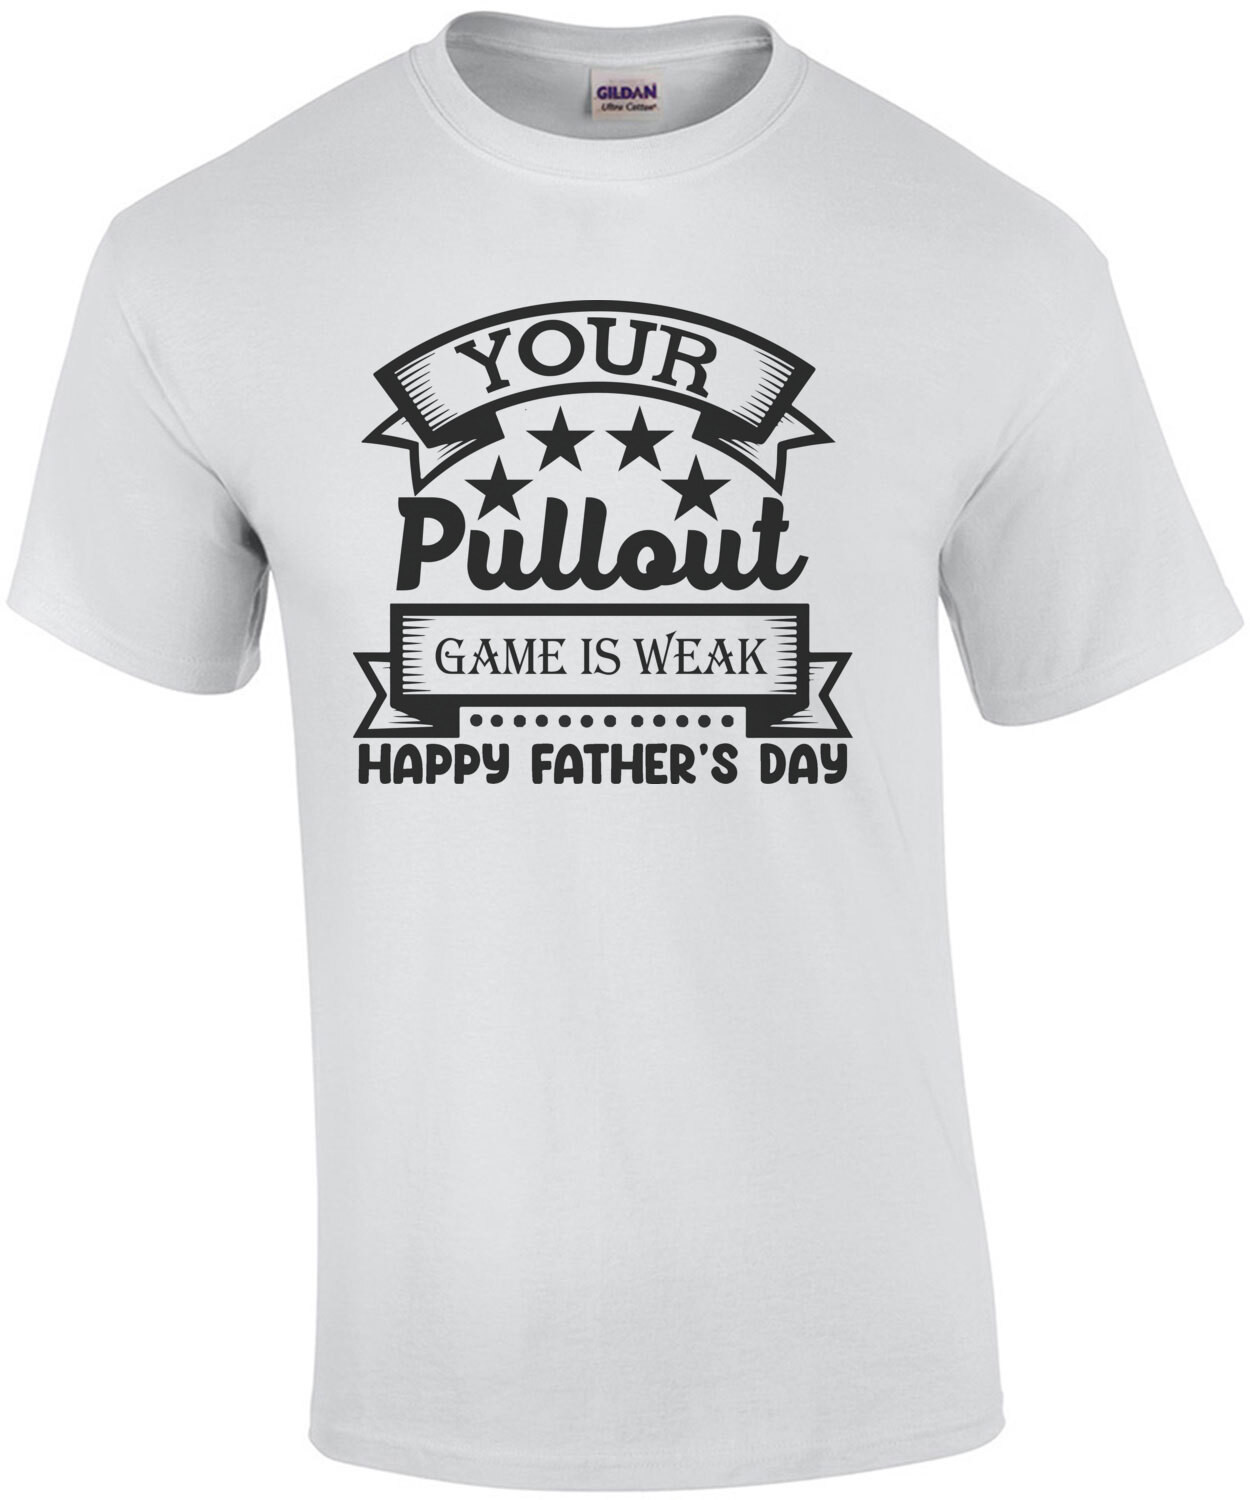 Your Pullout Game Is Weak - Happy Fathers Day